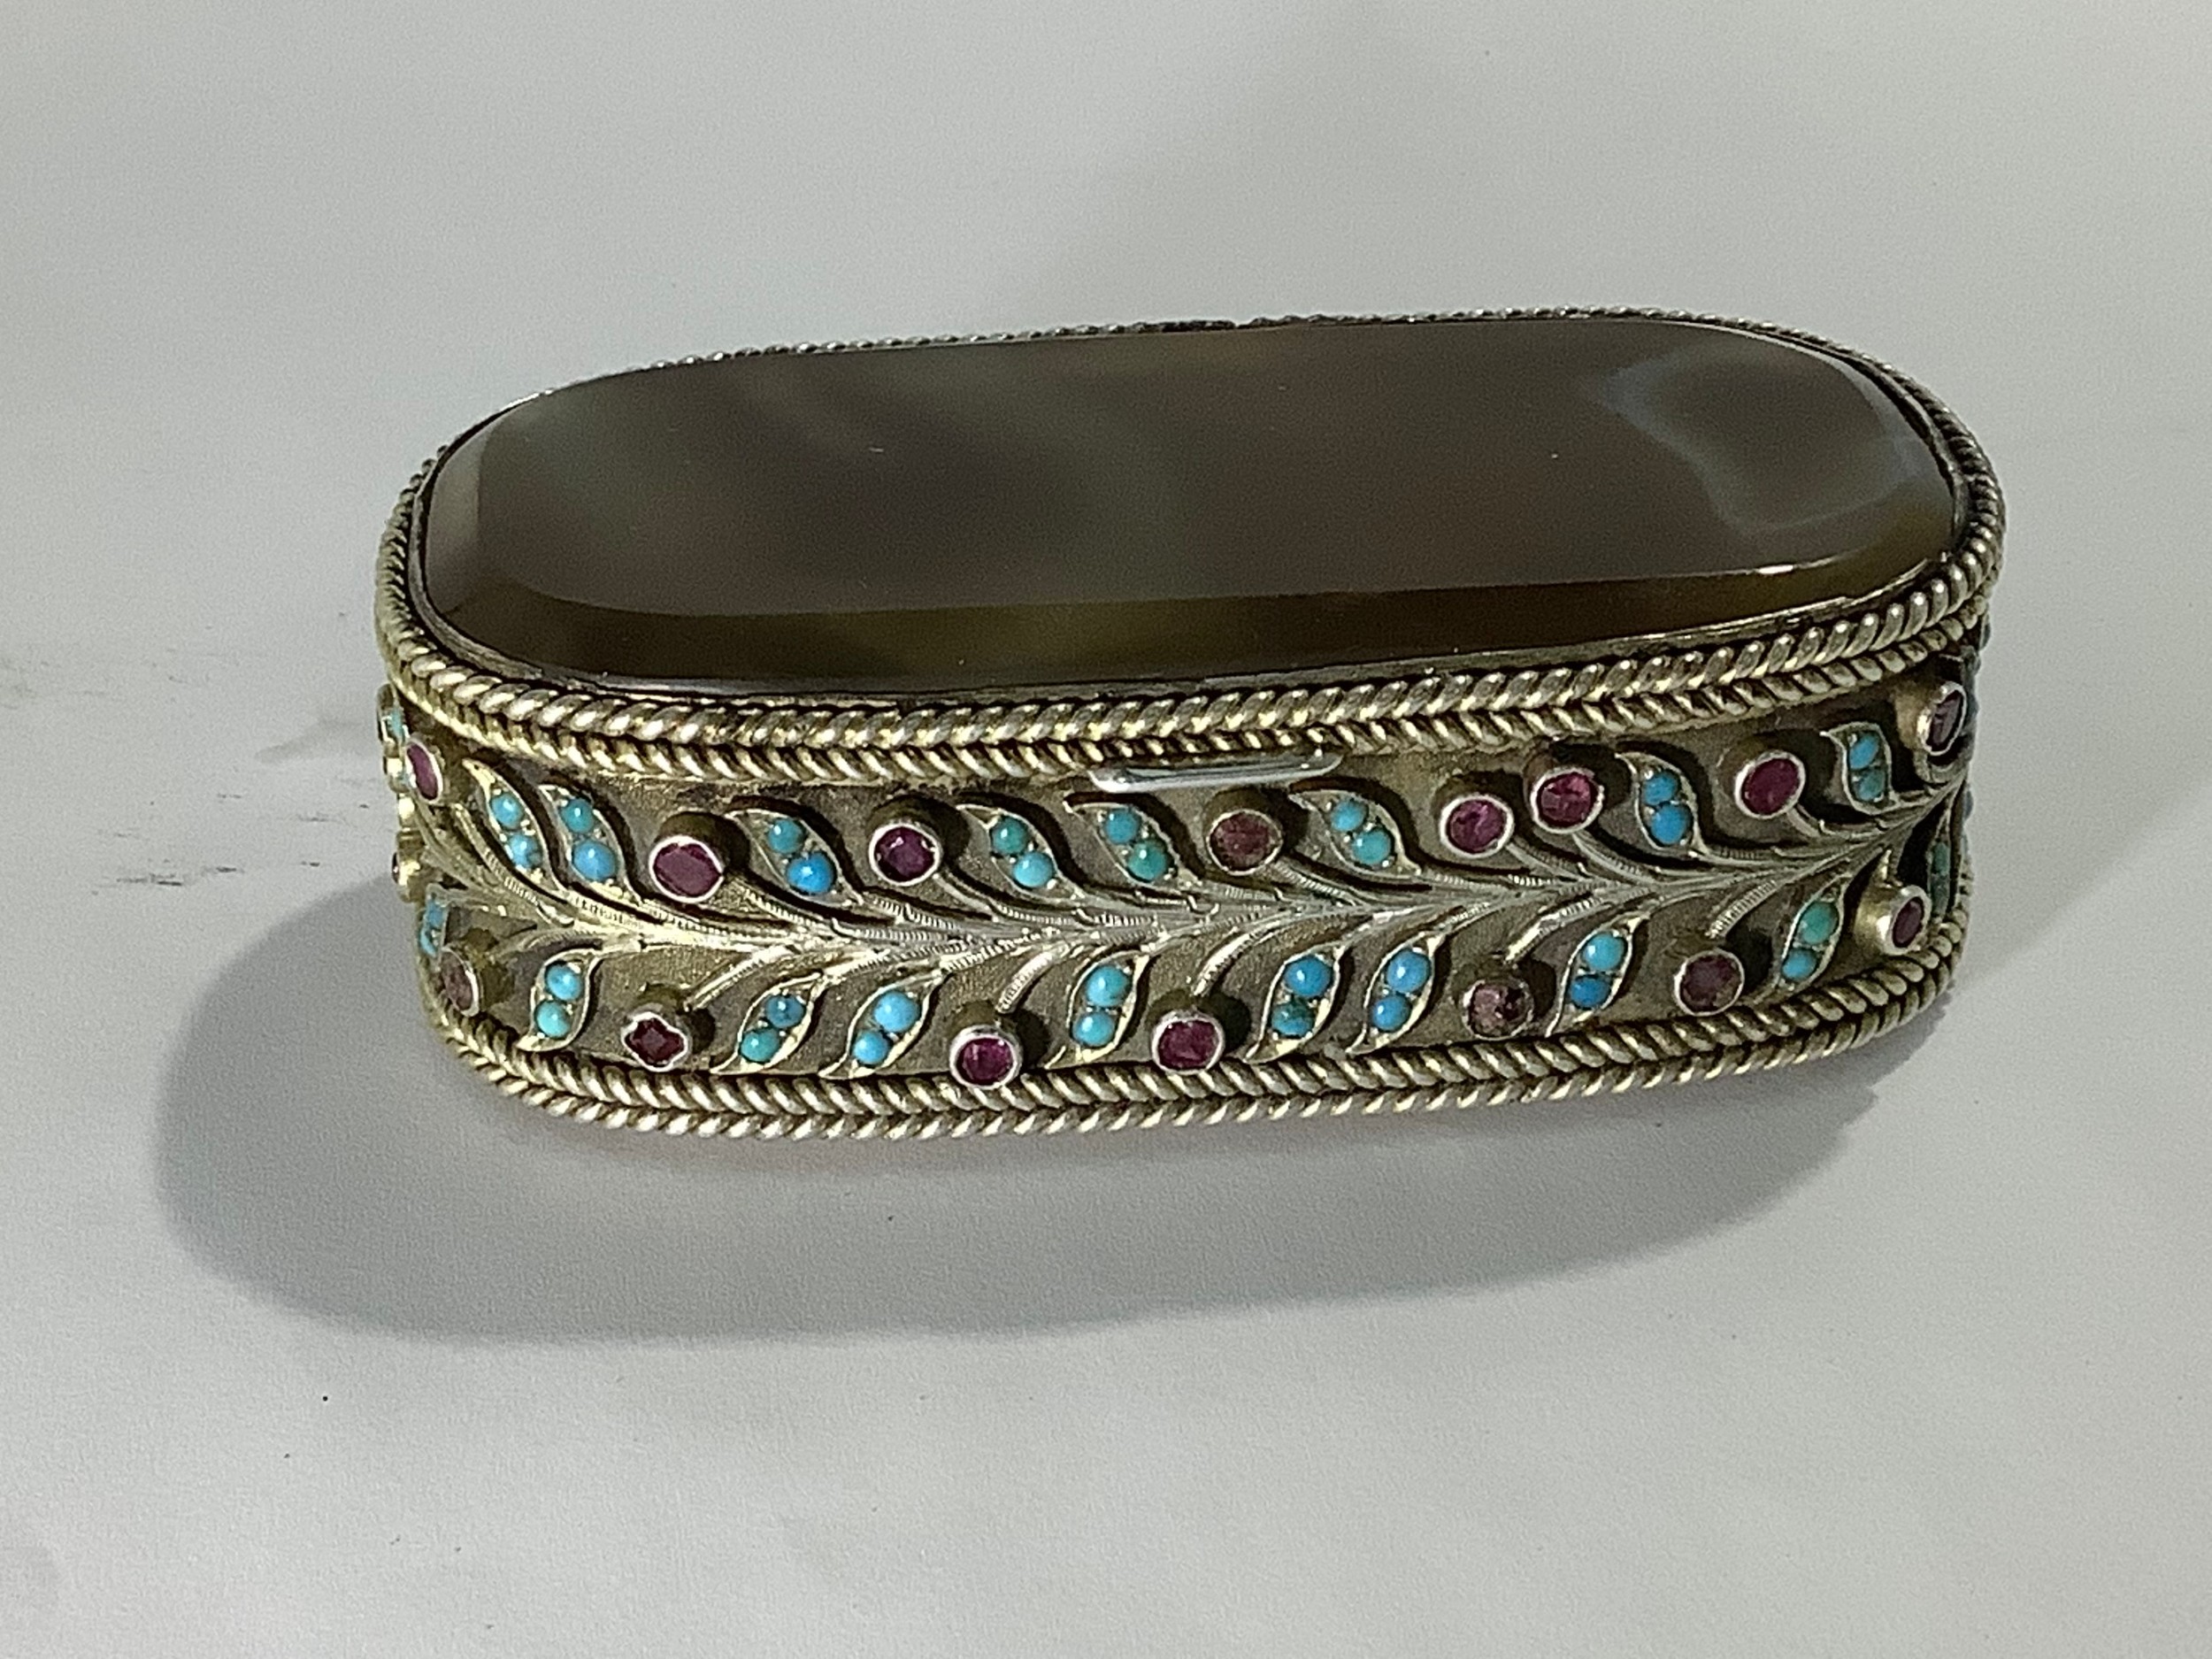 A late19th/early 20th century Indian/Persian white-metal casket of elongated oval form, with inset